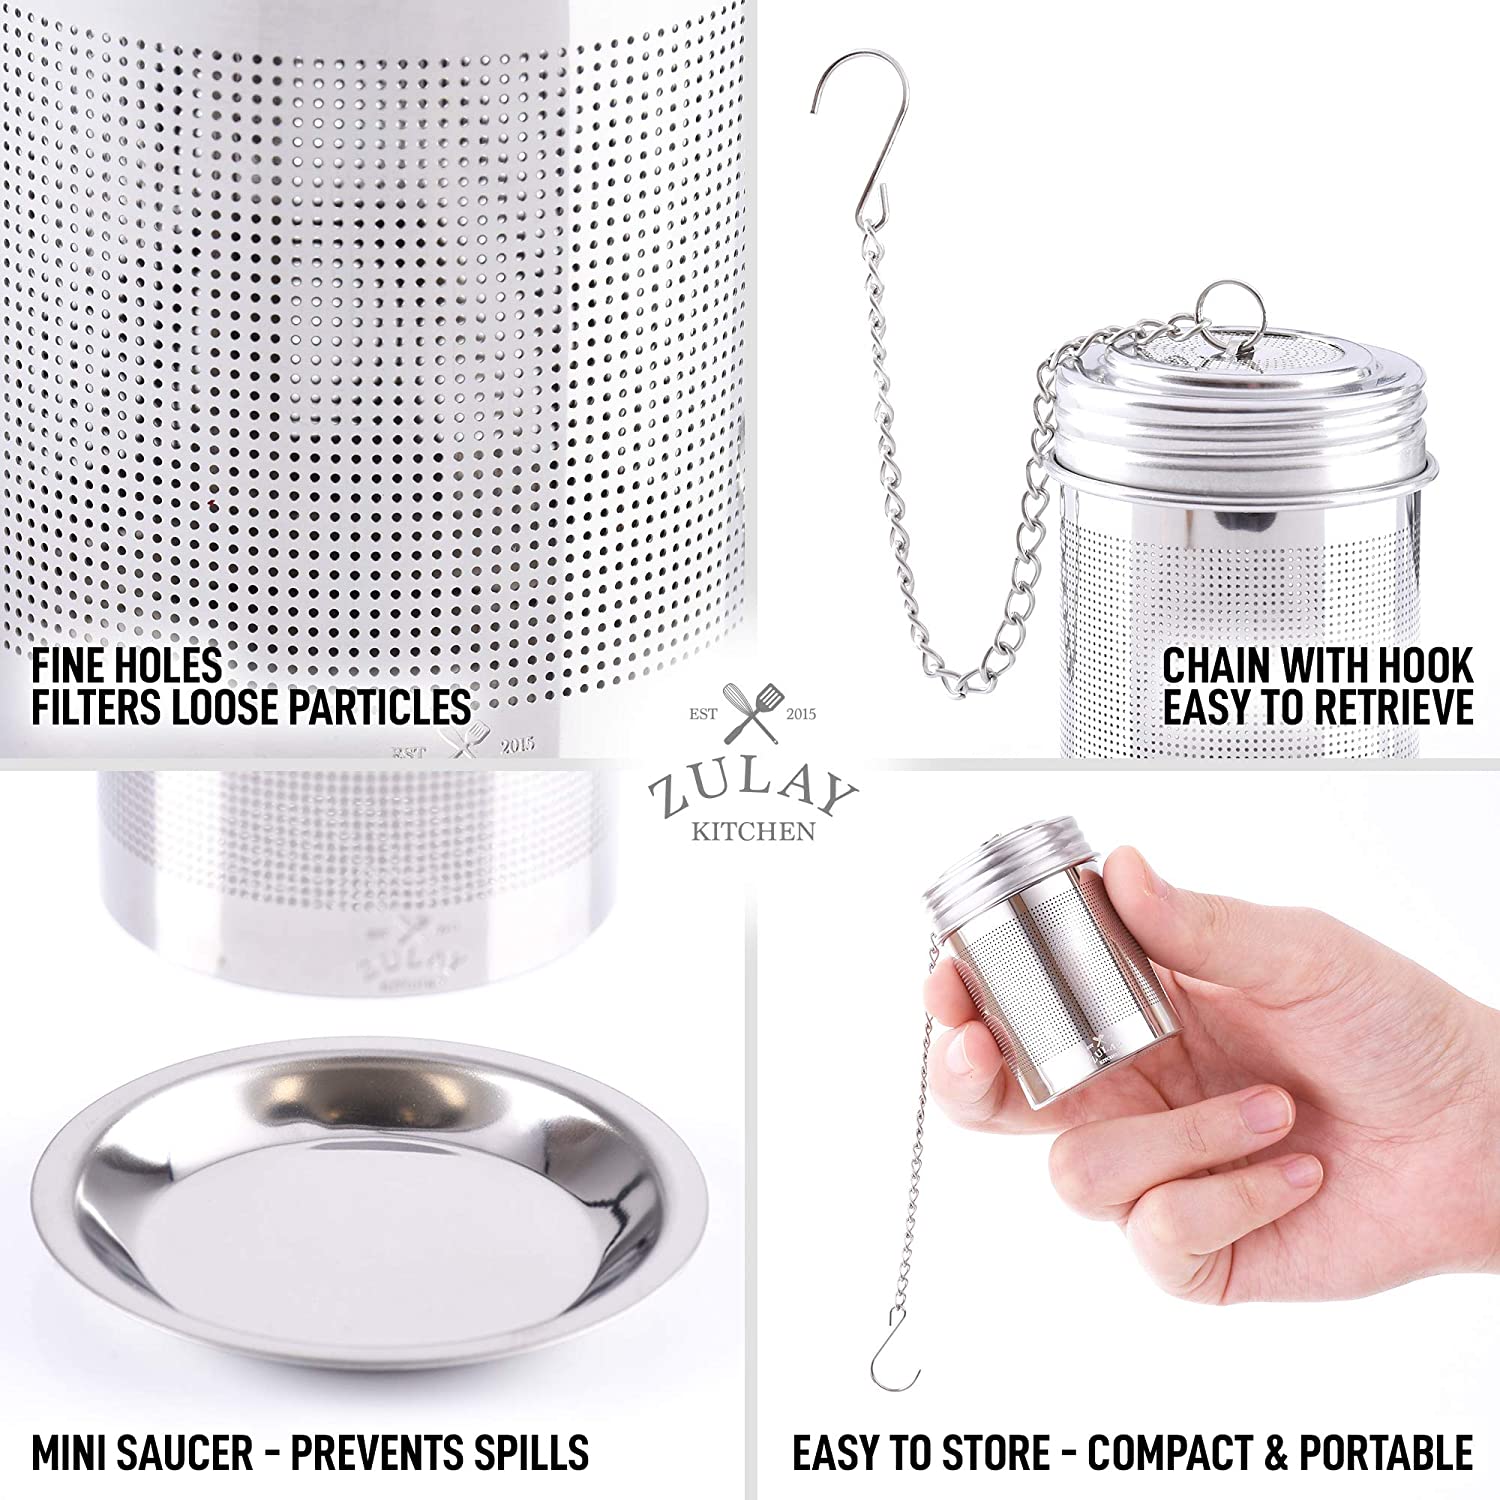 Stainless Steel Tea Infusers (Set of 2) - Zulay KitchenZulay Kitchen